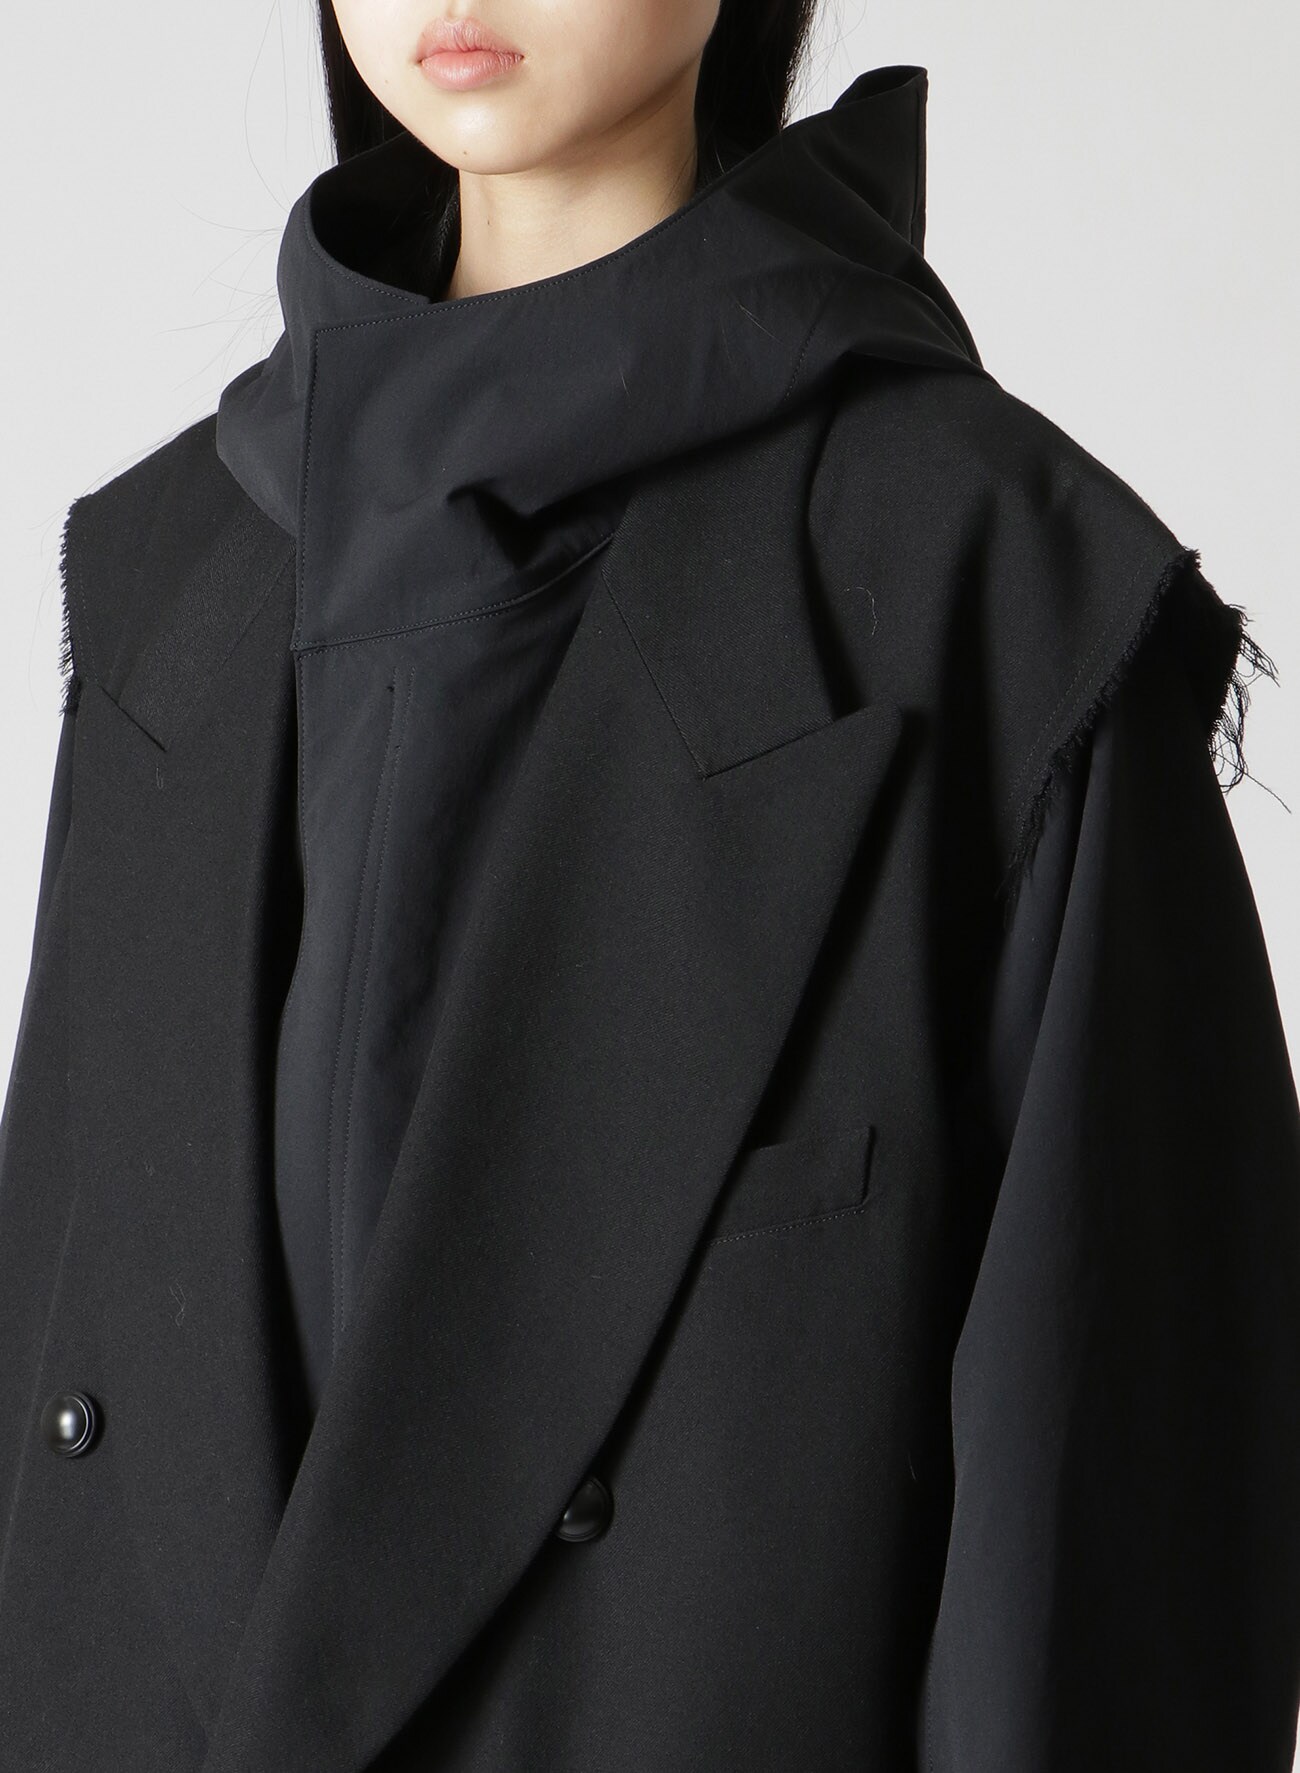 OLD ARMY SERGE DOUBLE LAYERED TAILORED COAT